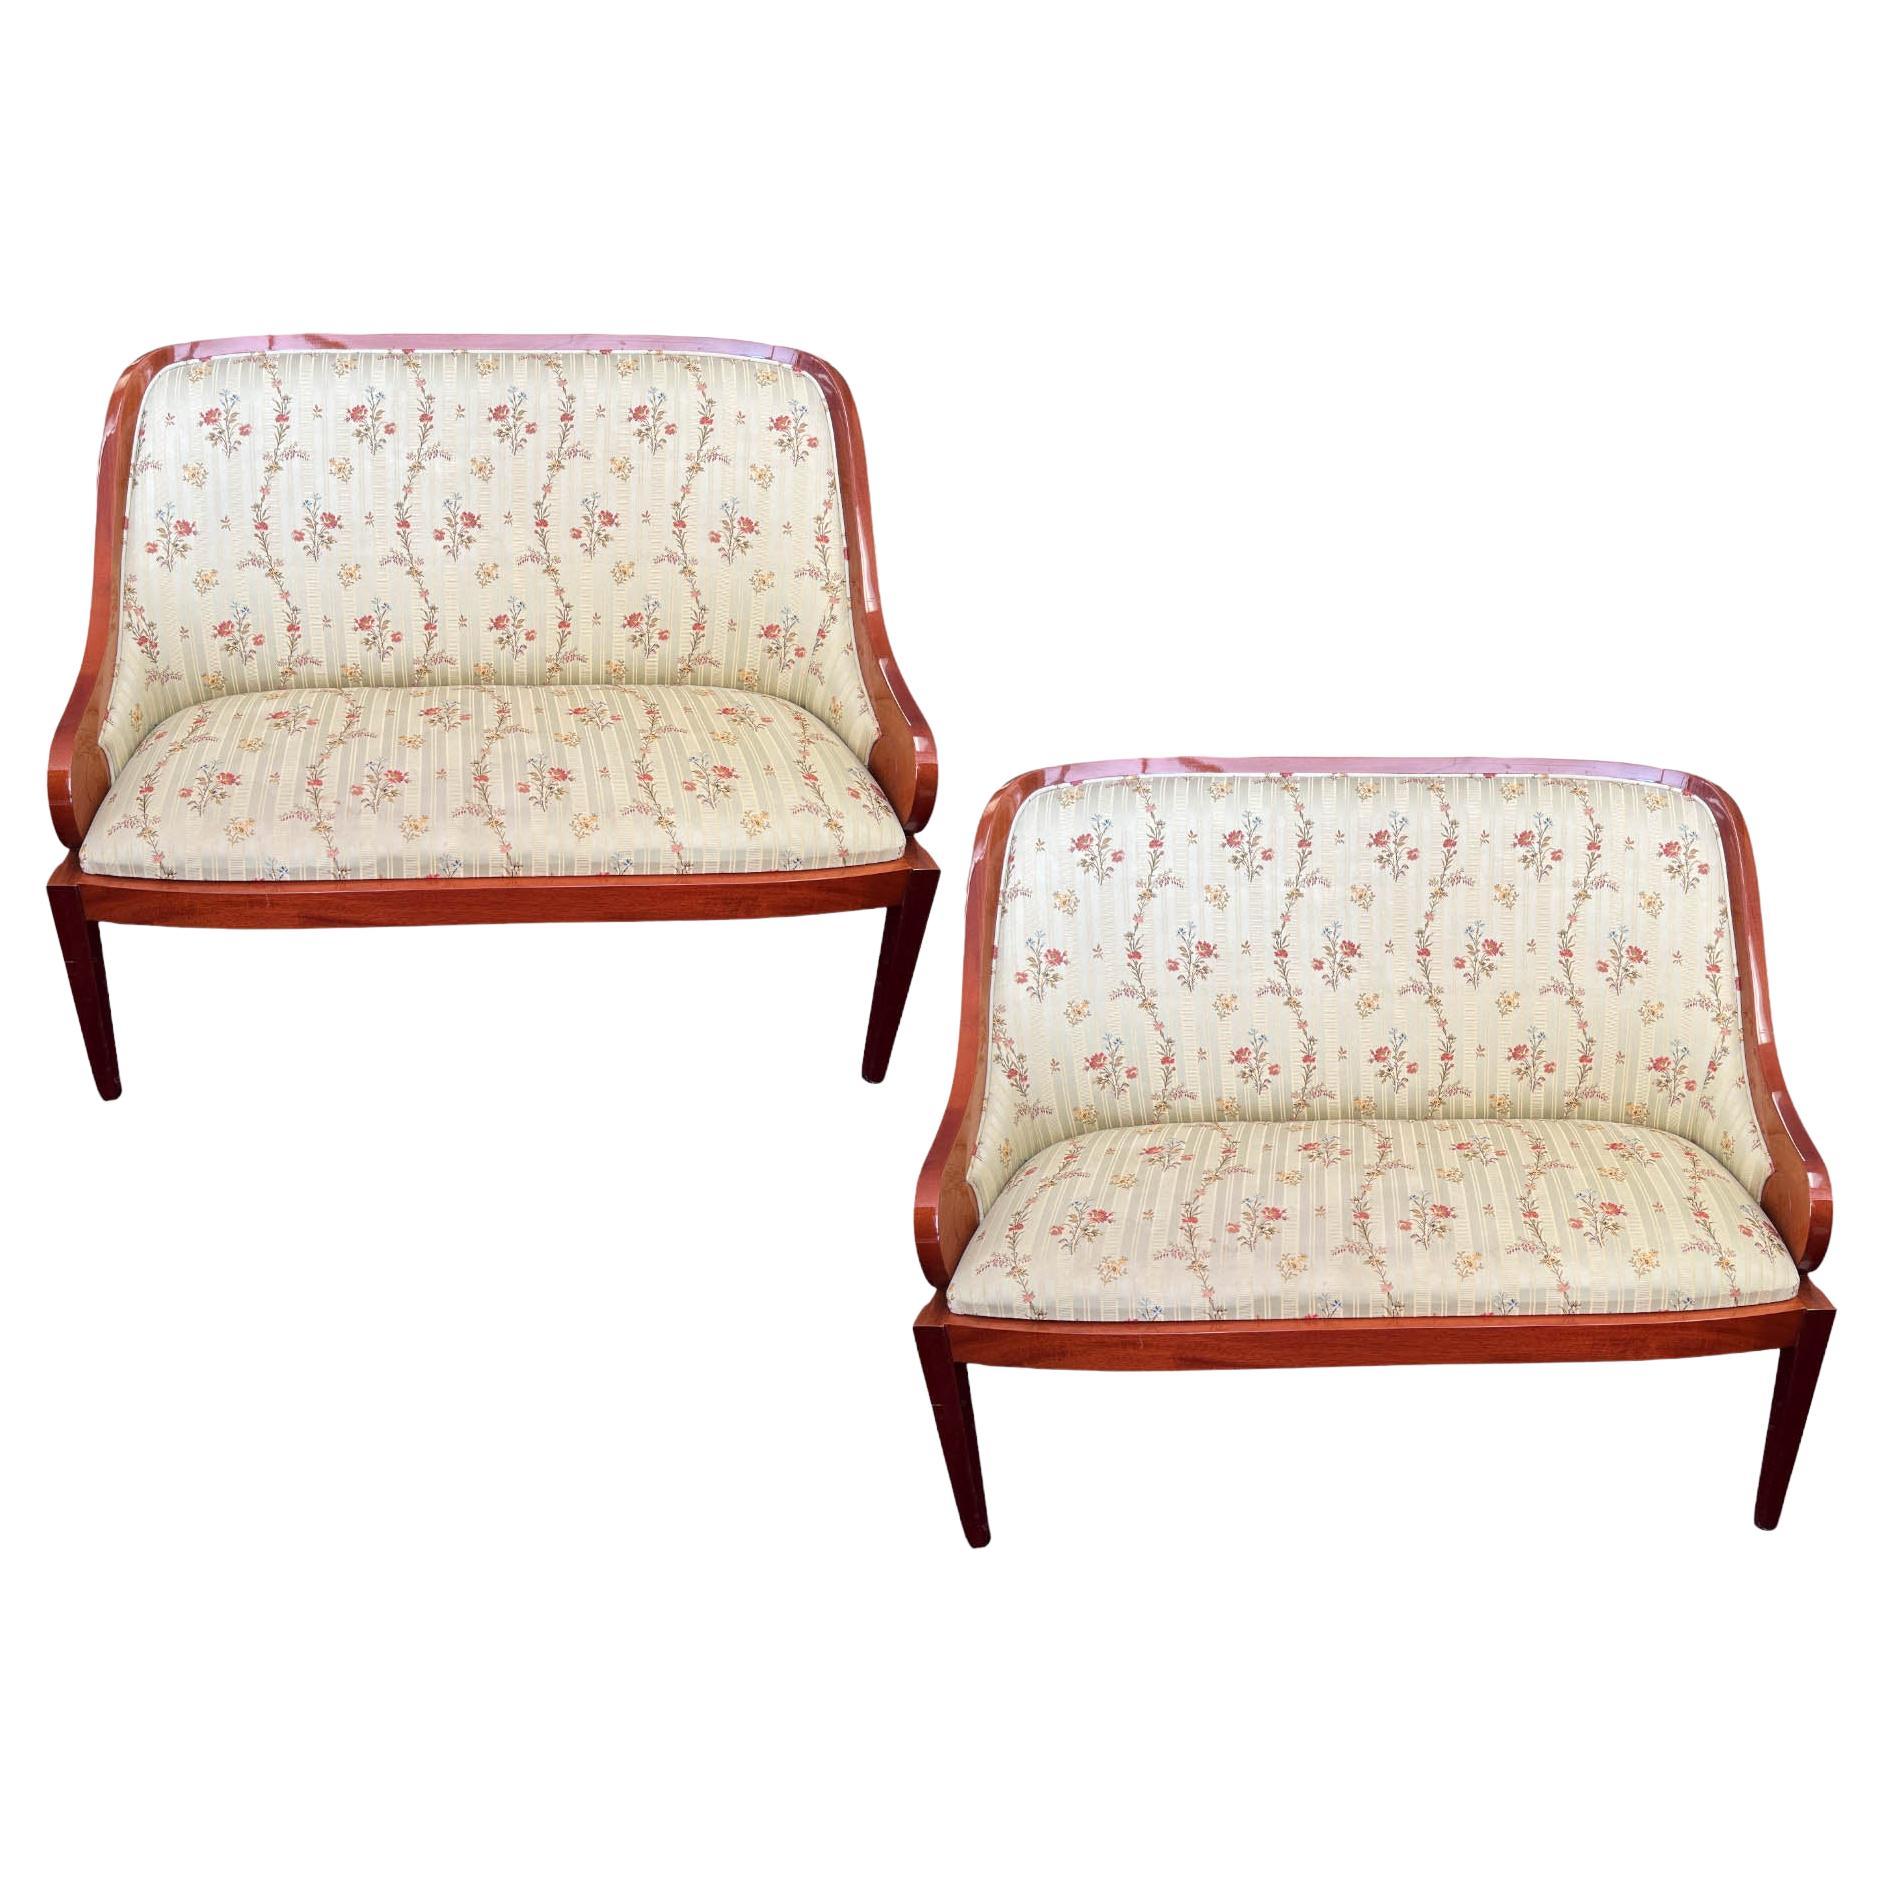 English Art Deco Benches / Loveseats- Set of 2 For Sale